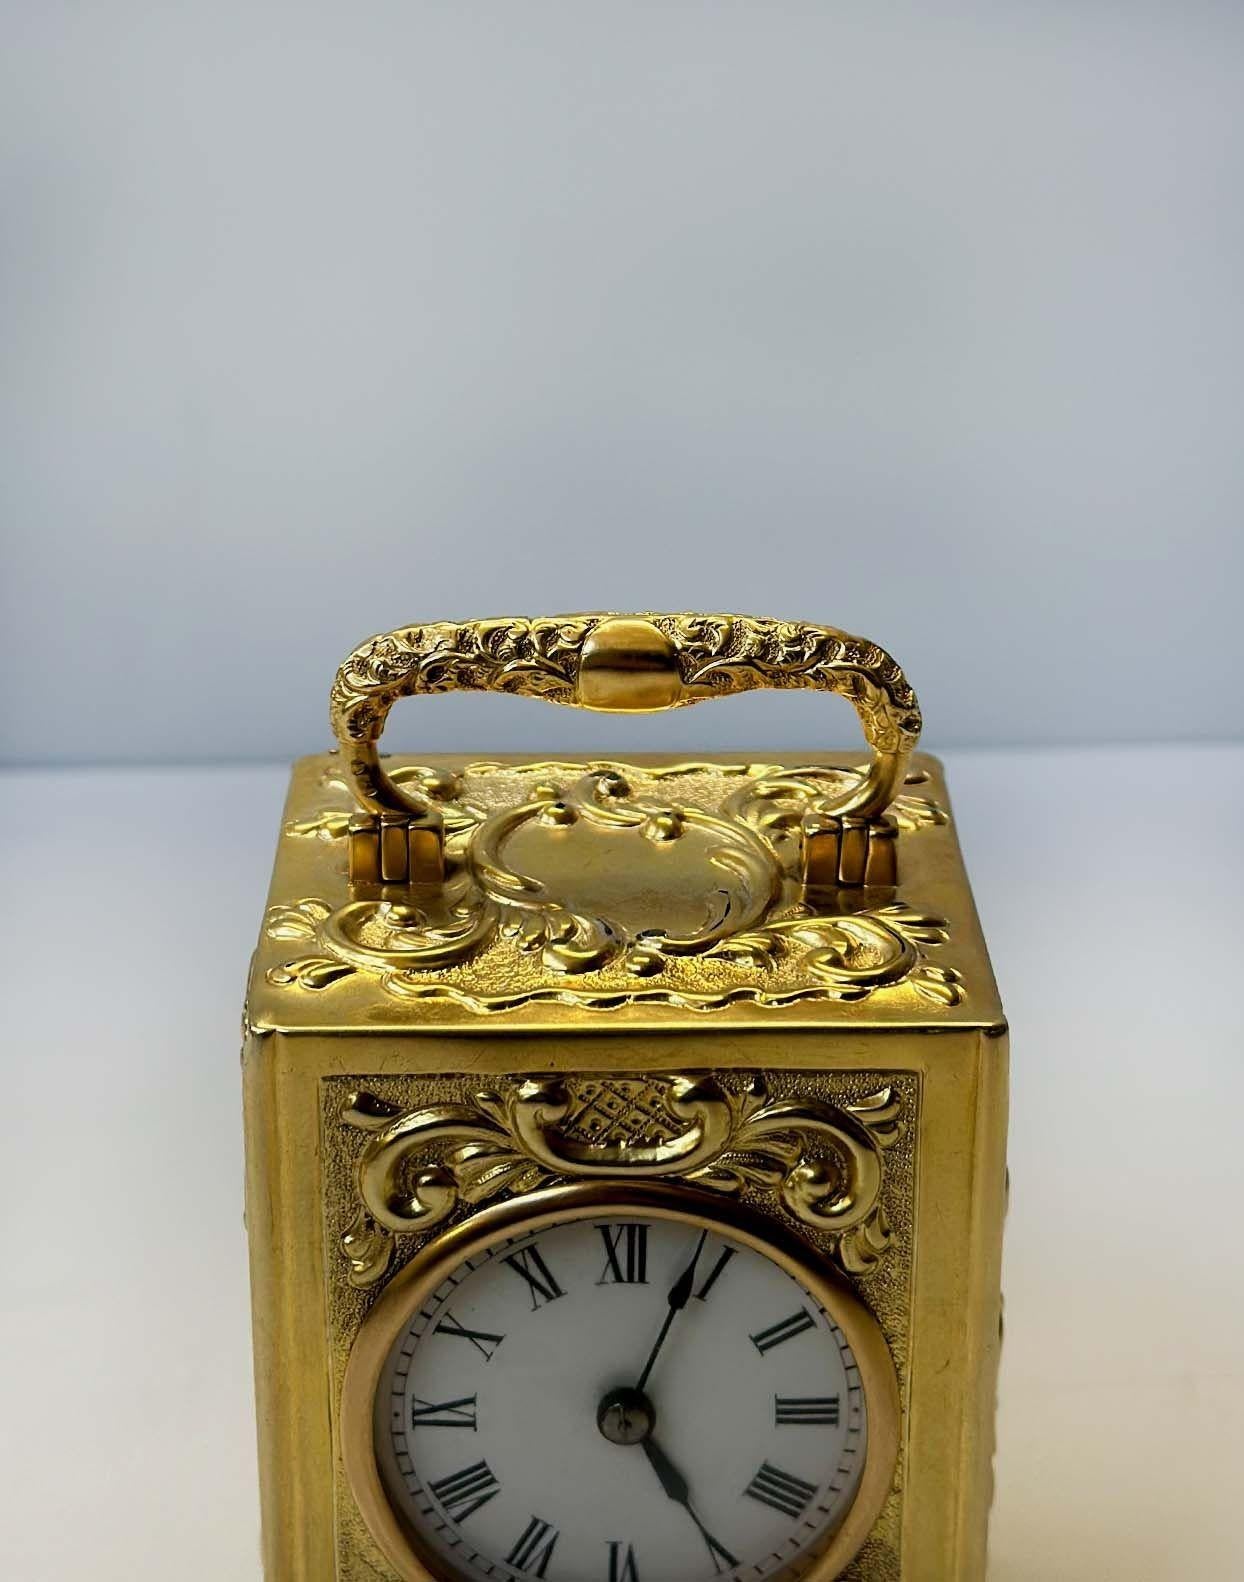 Beautiful brass carriage clock made by R&C Paris having decorated foliate scrolls all around the piece and standing on four winged beast figure feet, also having enamel dial with black Roman numerals. Stamped on the inside of the clock. Made in